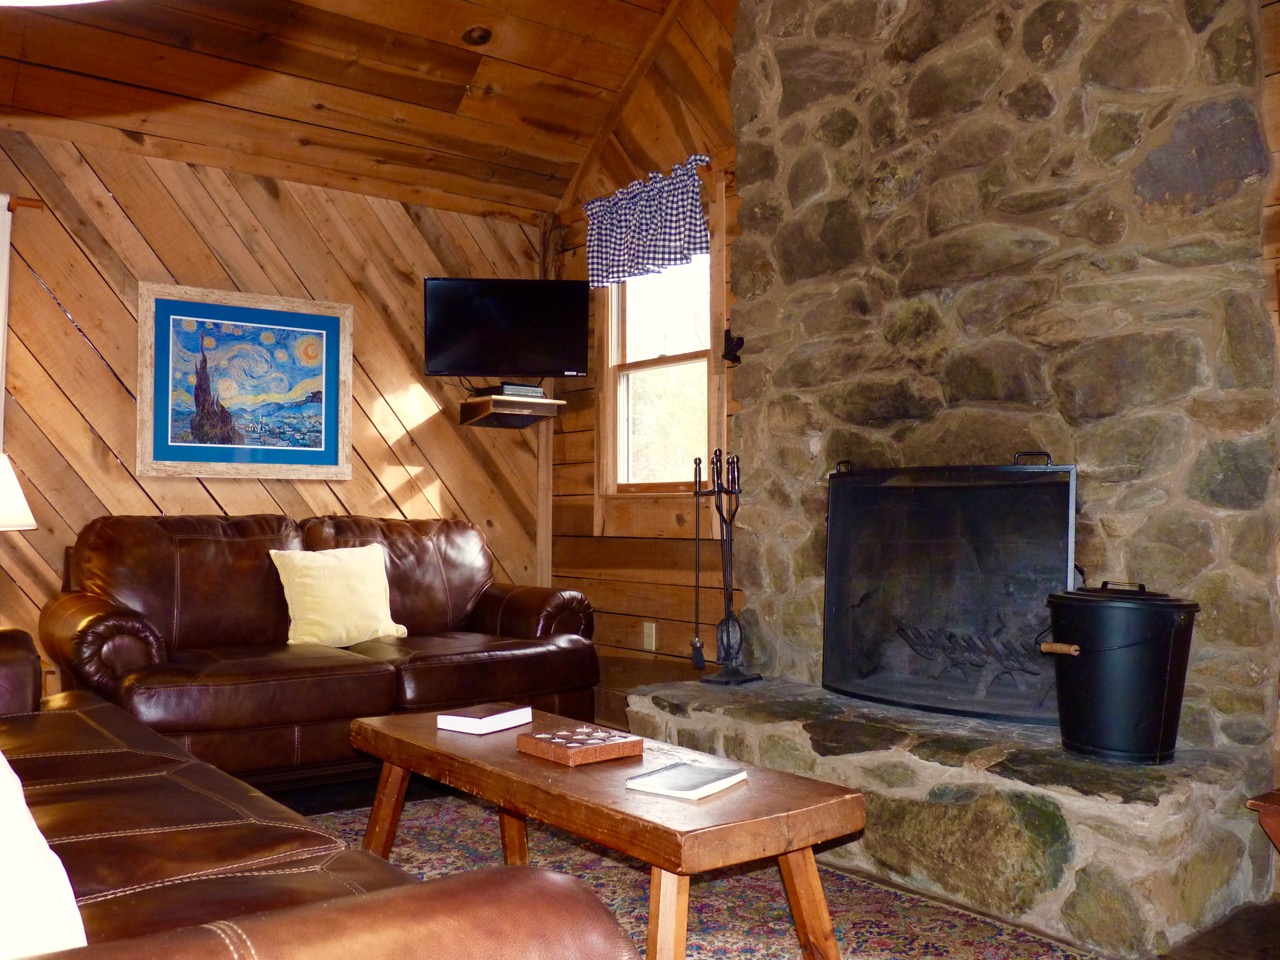 Cabins with Fireplaces Near Me New Wintergreen Ski Resort Lodging Cabins In Va Near